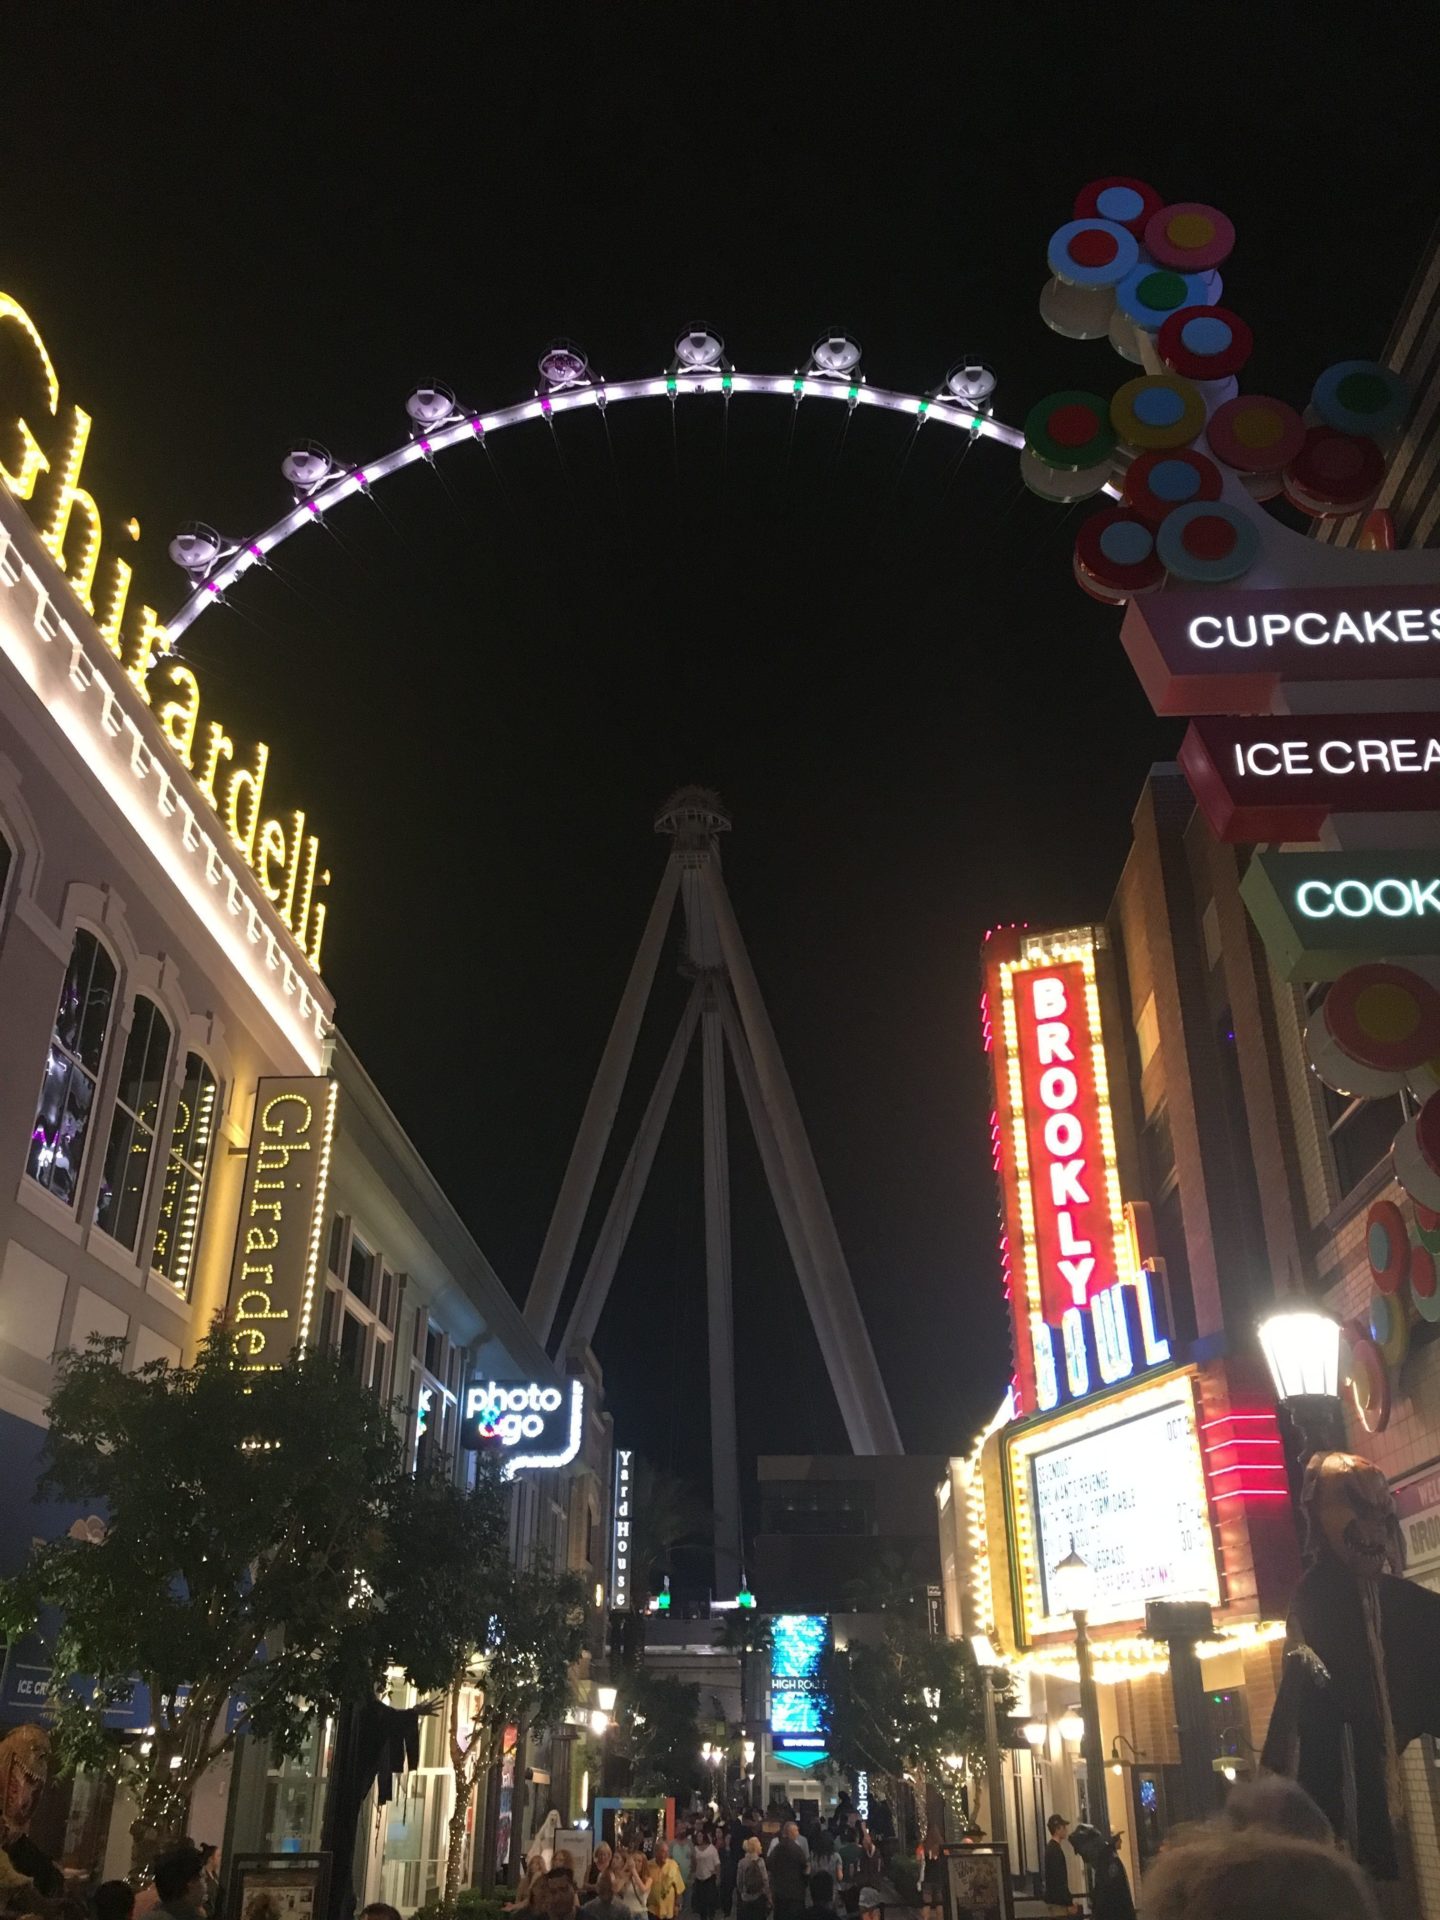 The Highroller at The Linq hotel- 550 feet high!